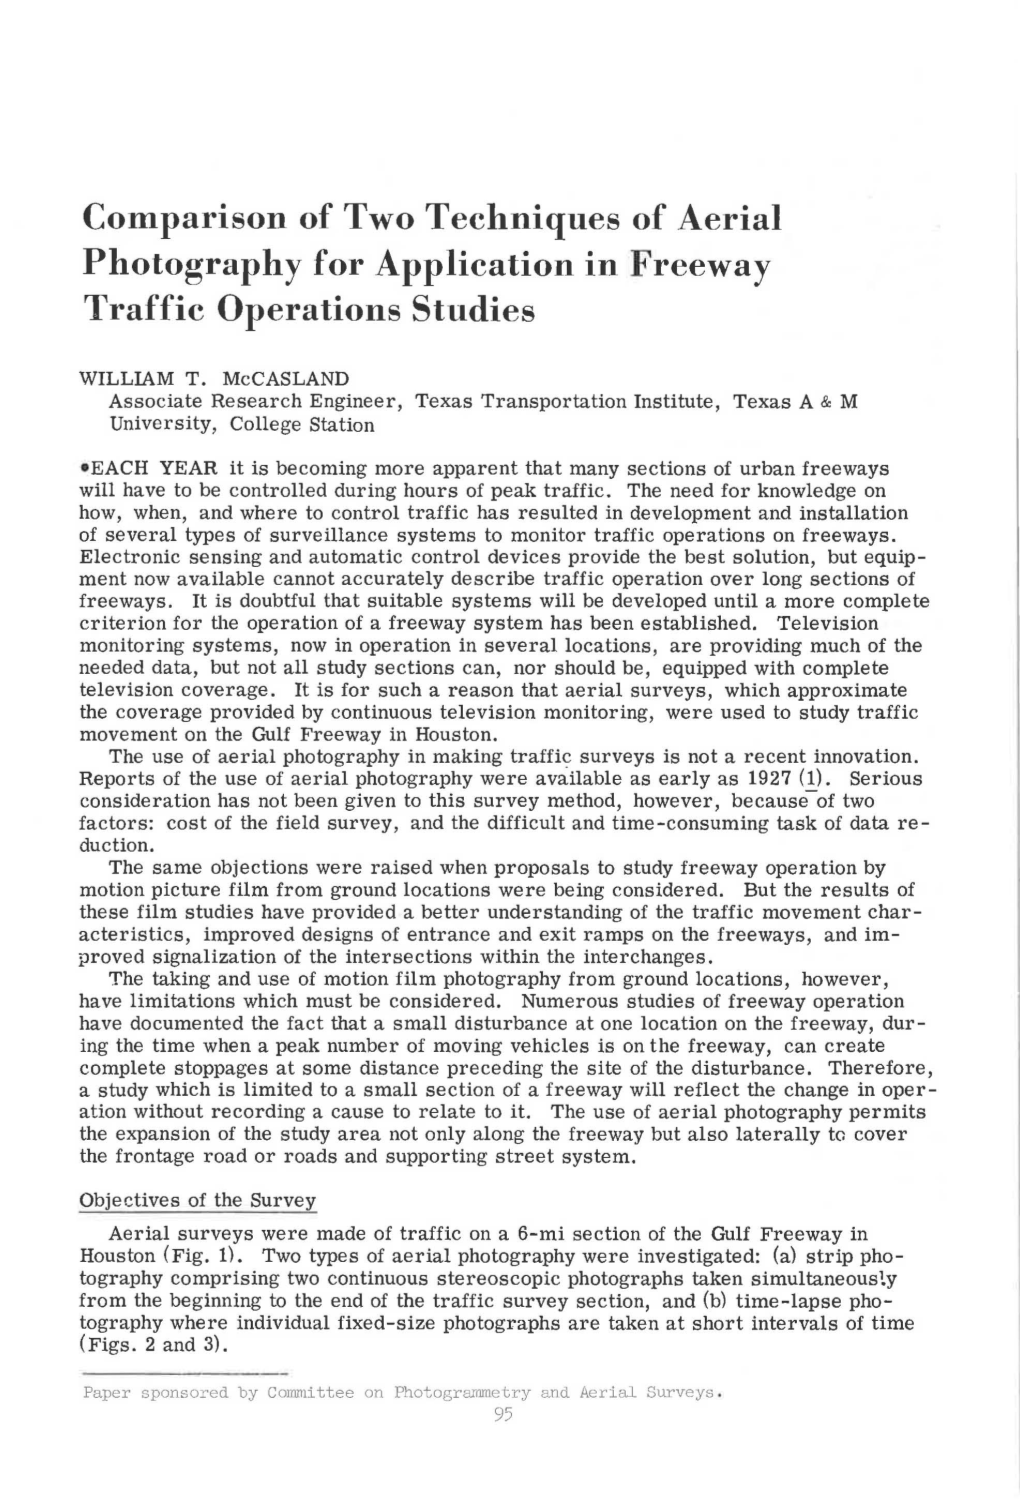 Comparison of Two Techniques of Aerial Photography for Application in Freeway Traffic Operations Studies